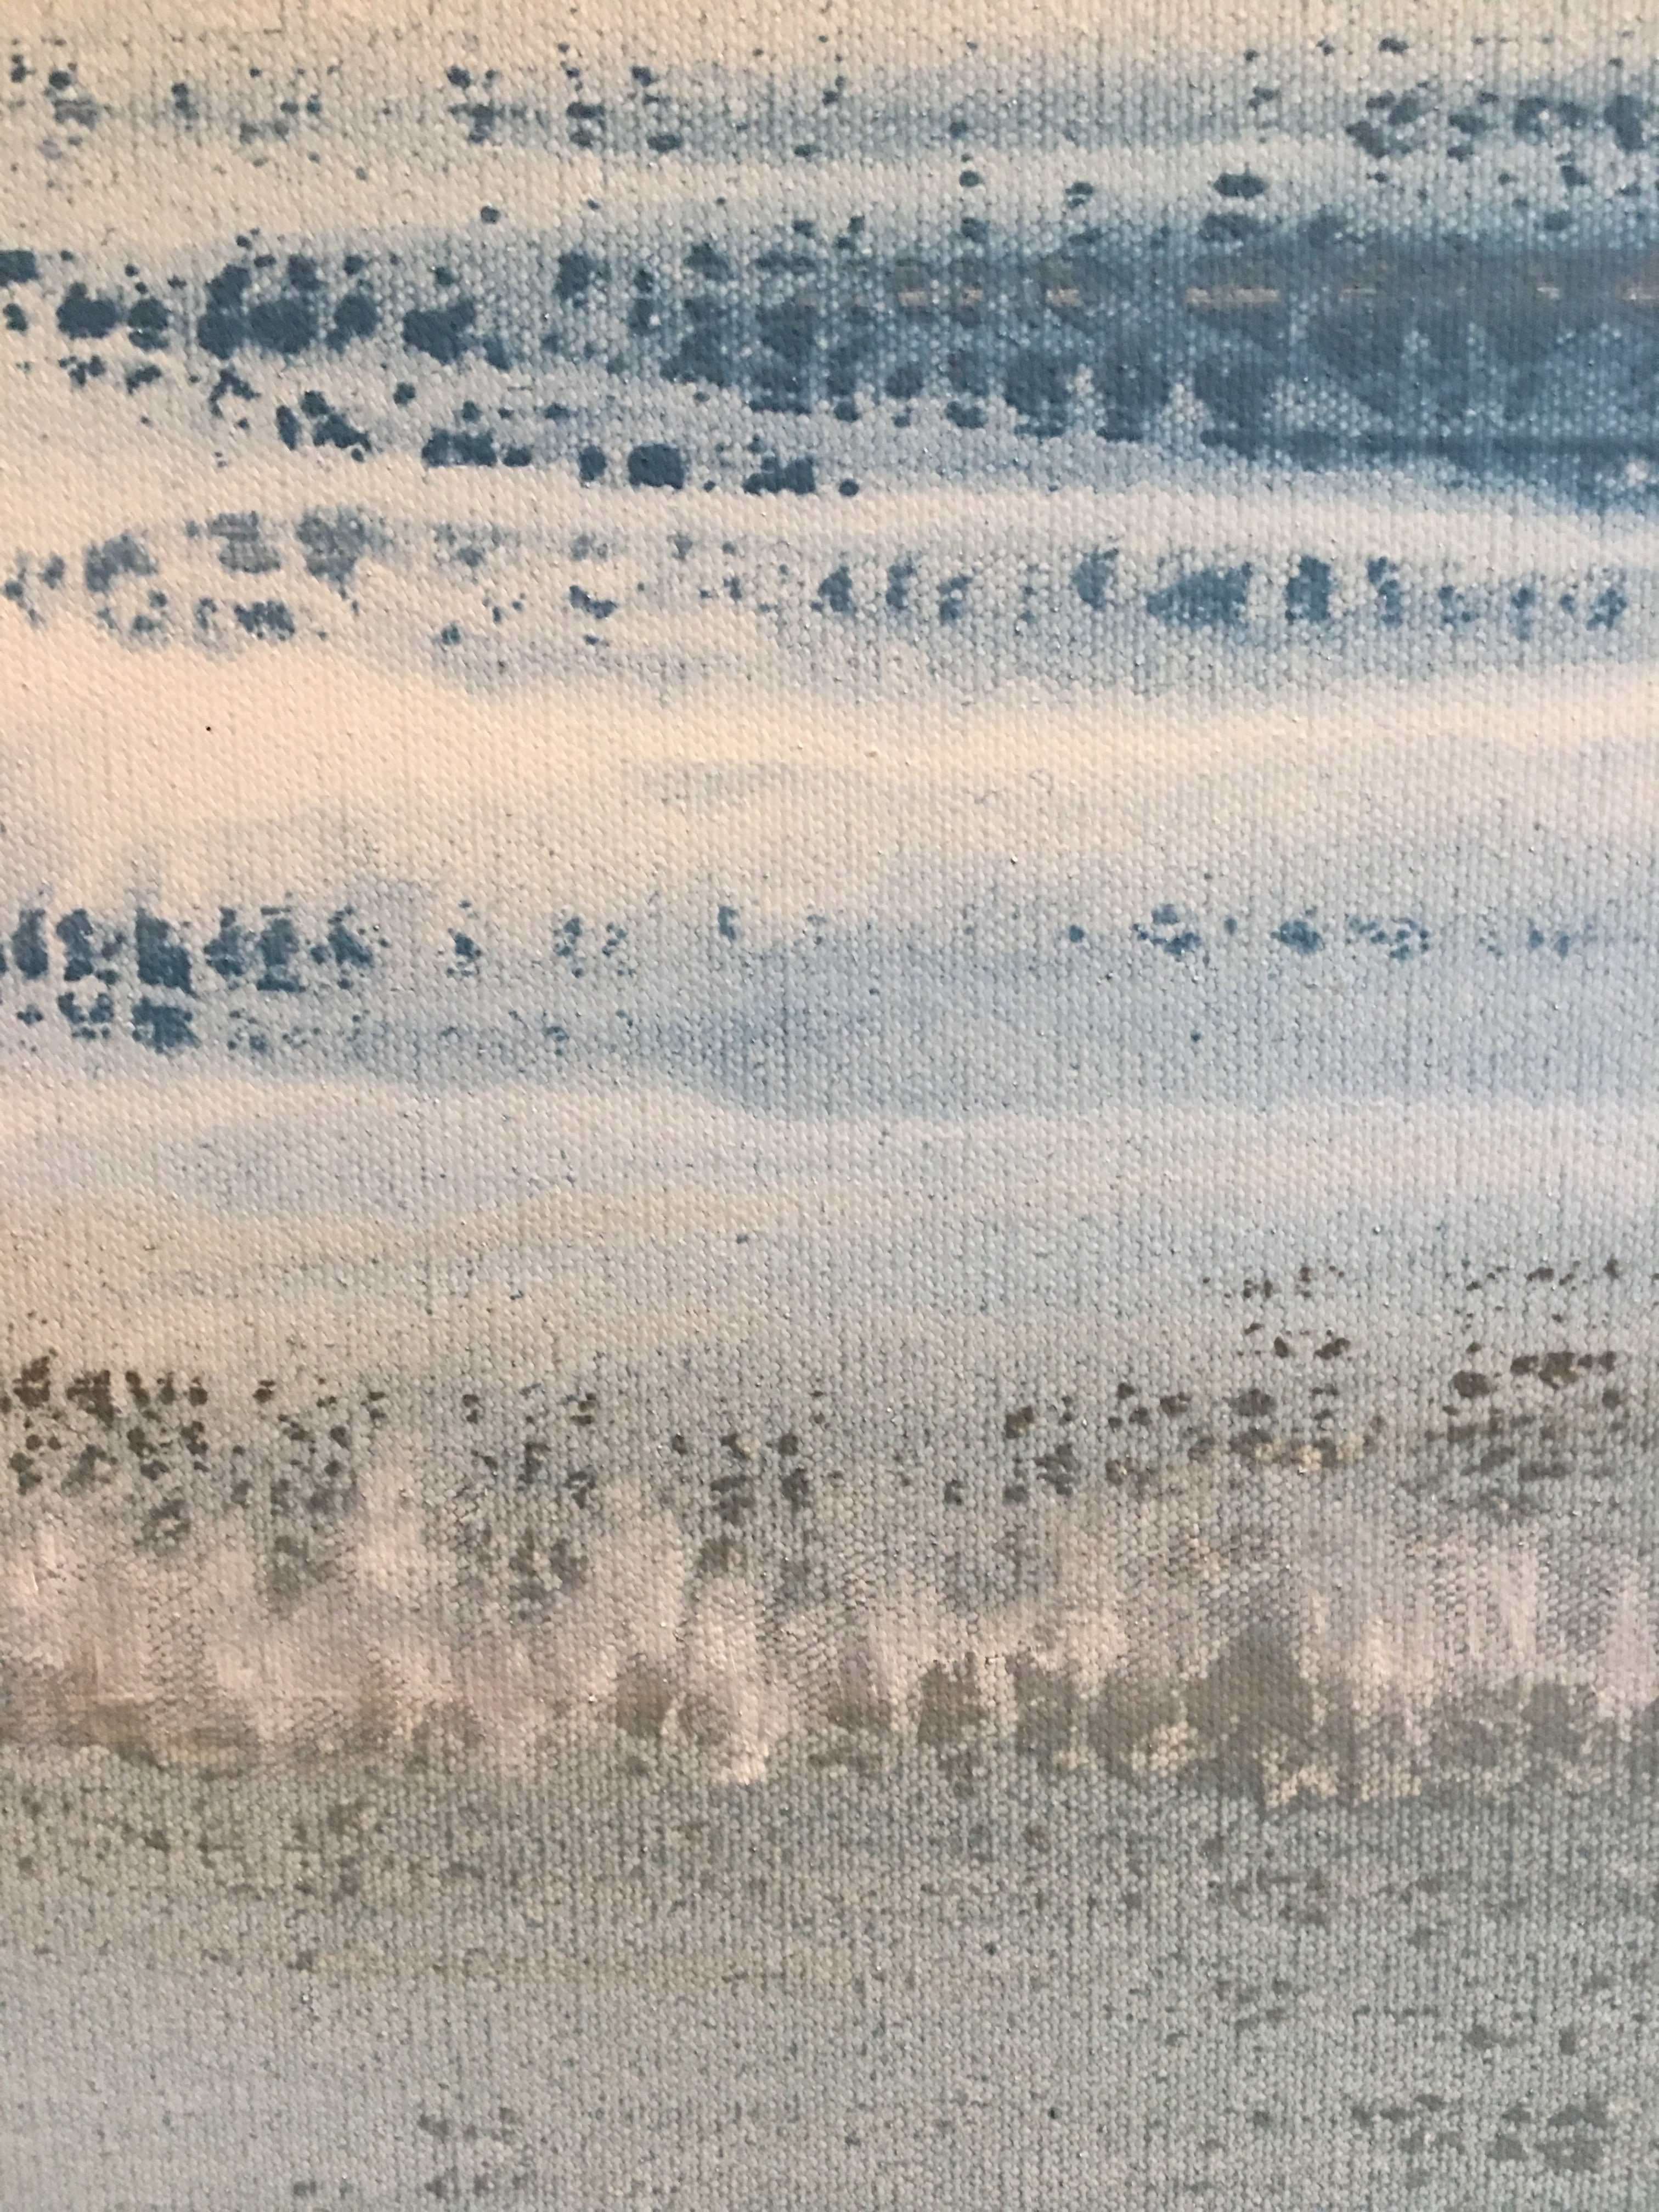 water and land abstract painting